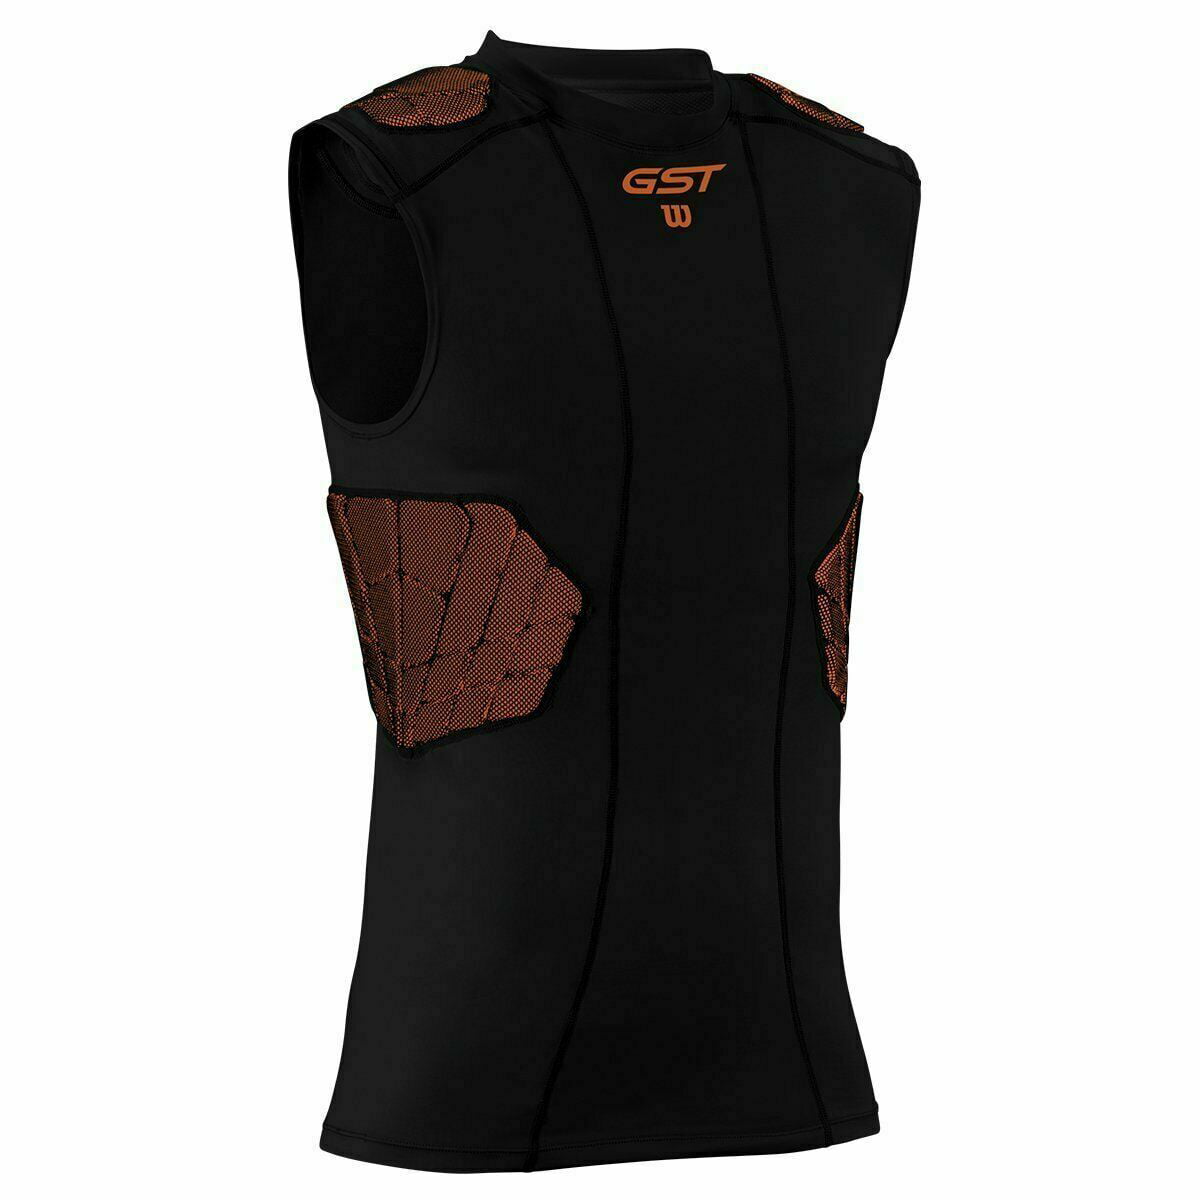 New with Tag Youth Wilson GST 5 Pad Protective Compression Body Shirt WTF983201 